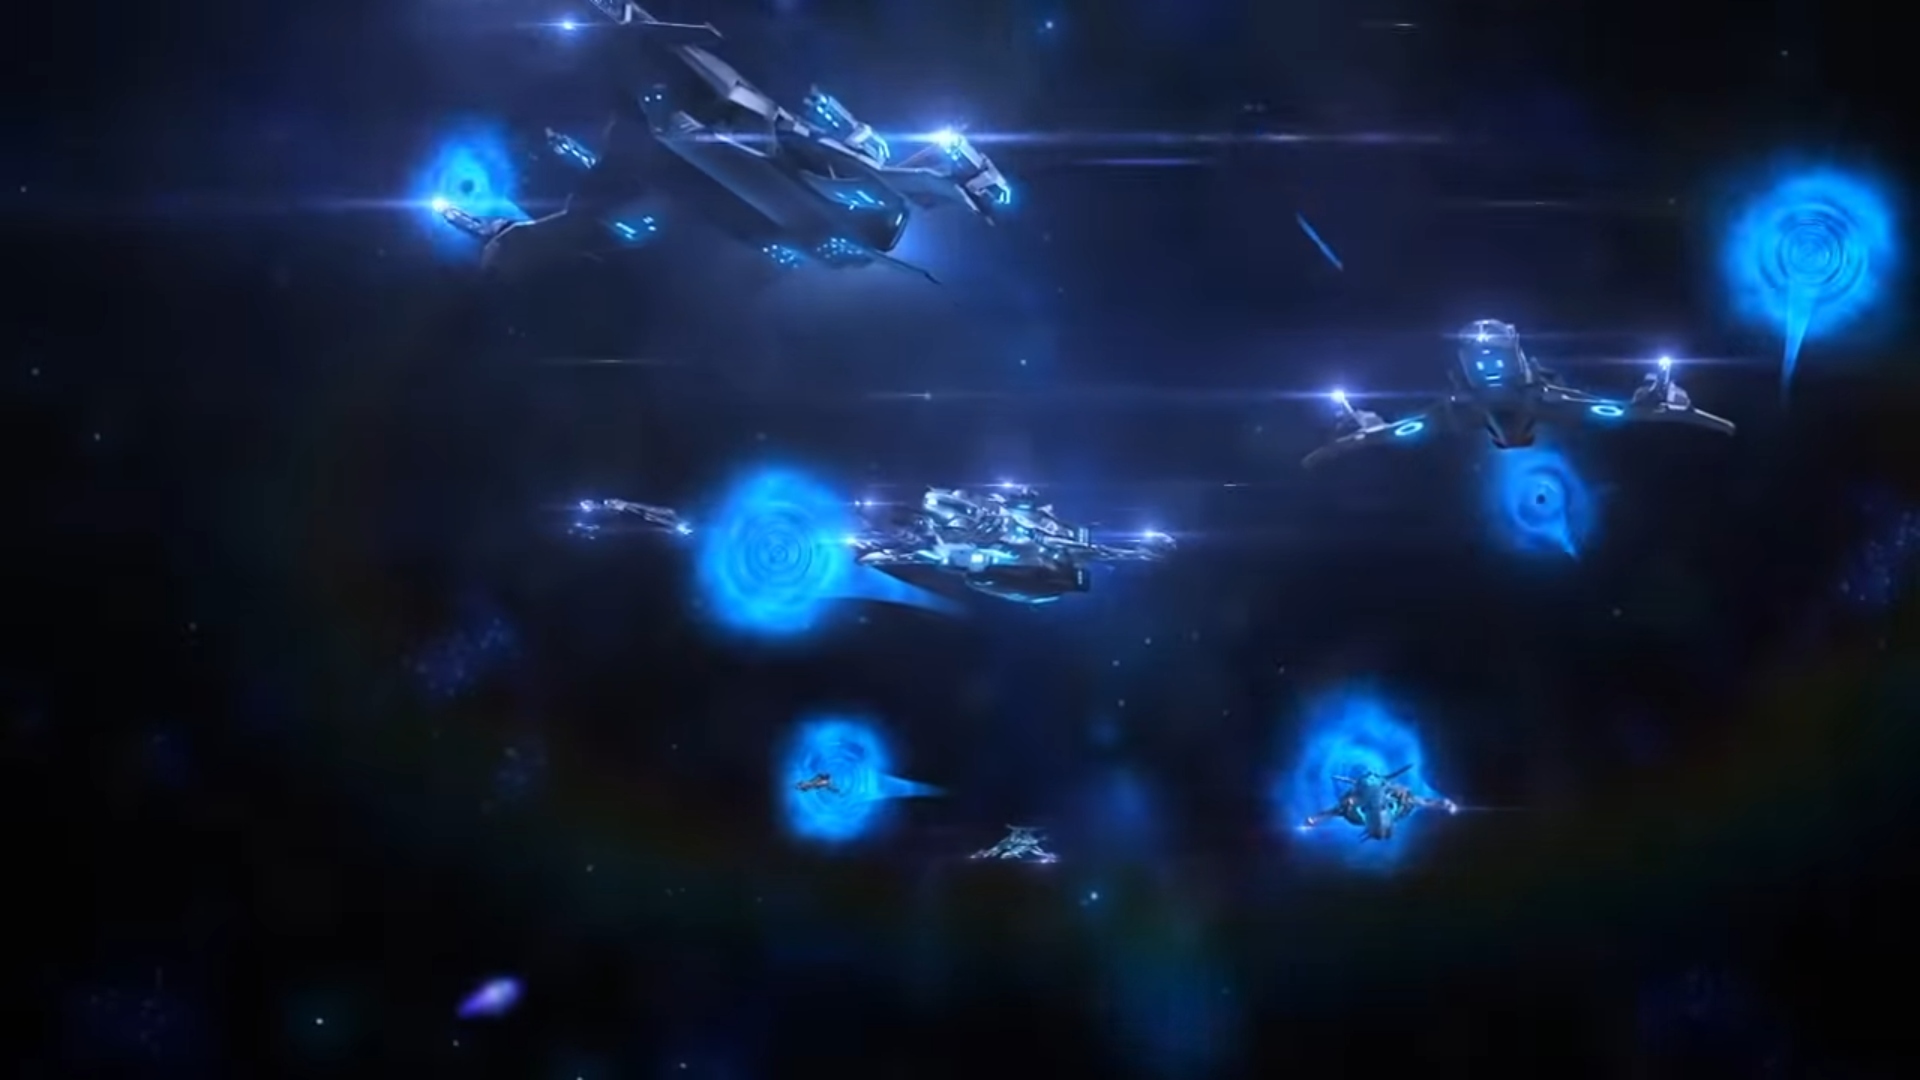 Best free MMOs: Ships with blue auras gather in Star Conflict